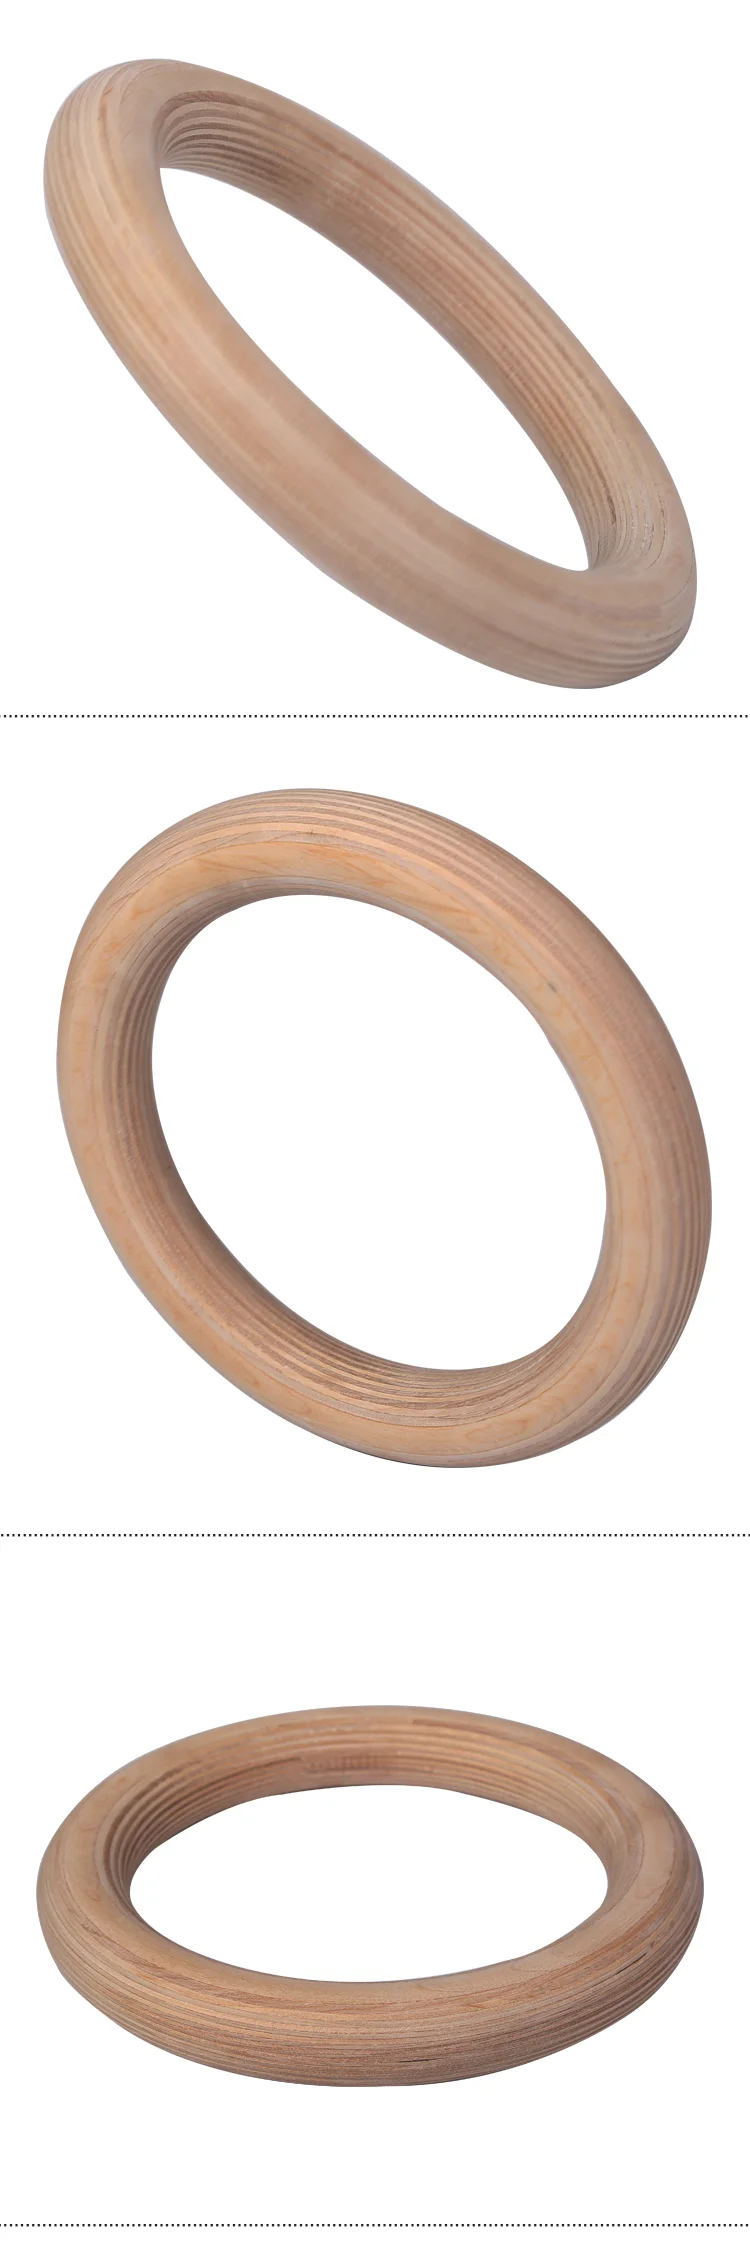 Gymnastic ring portable birch wooden gym rings